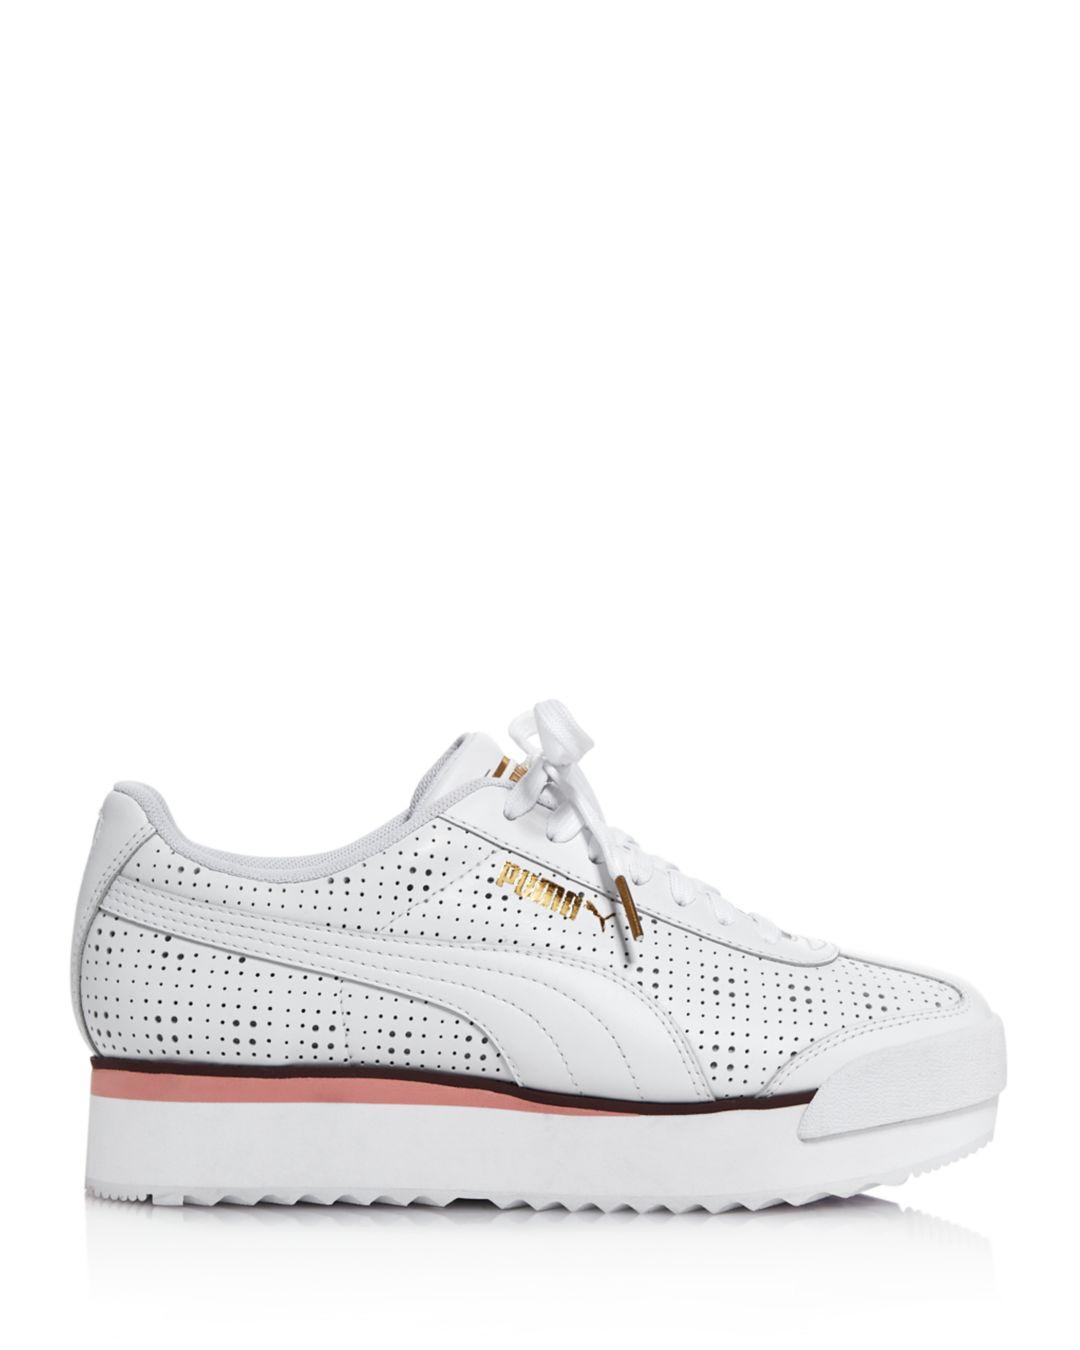 PUMA Women's Roma Amor Perforated Leather Platform Sneakers in White | Lyst